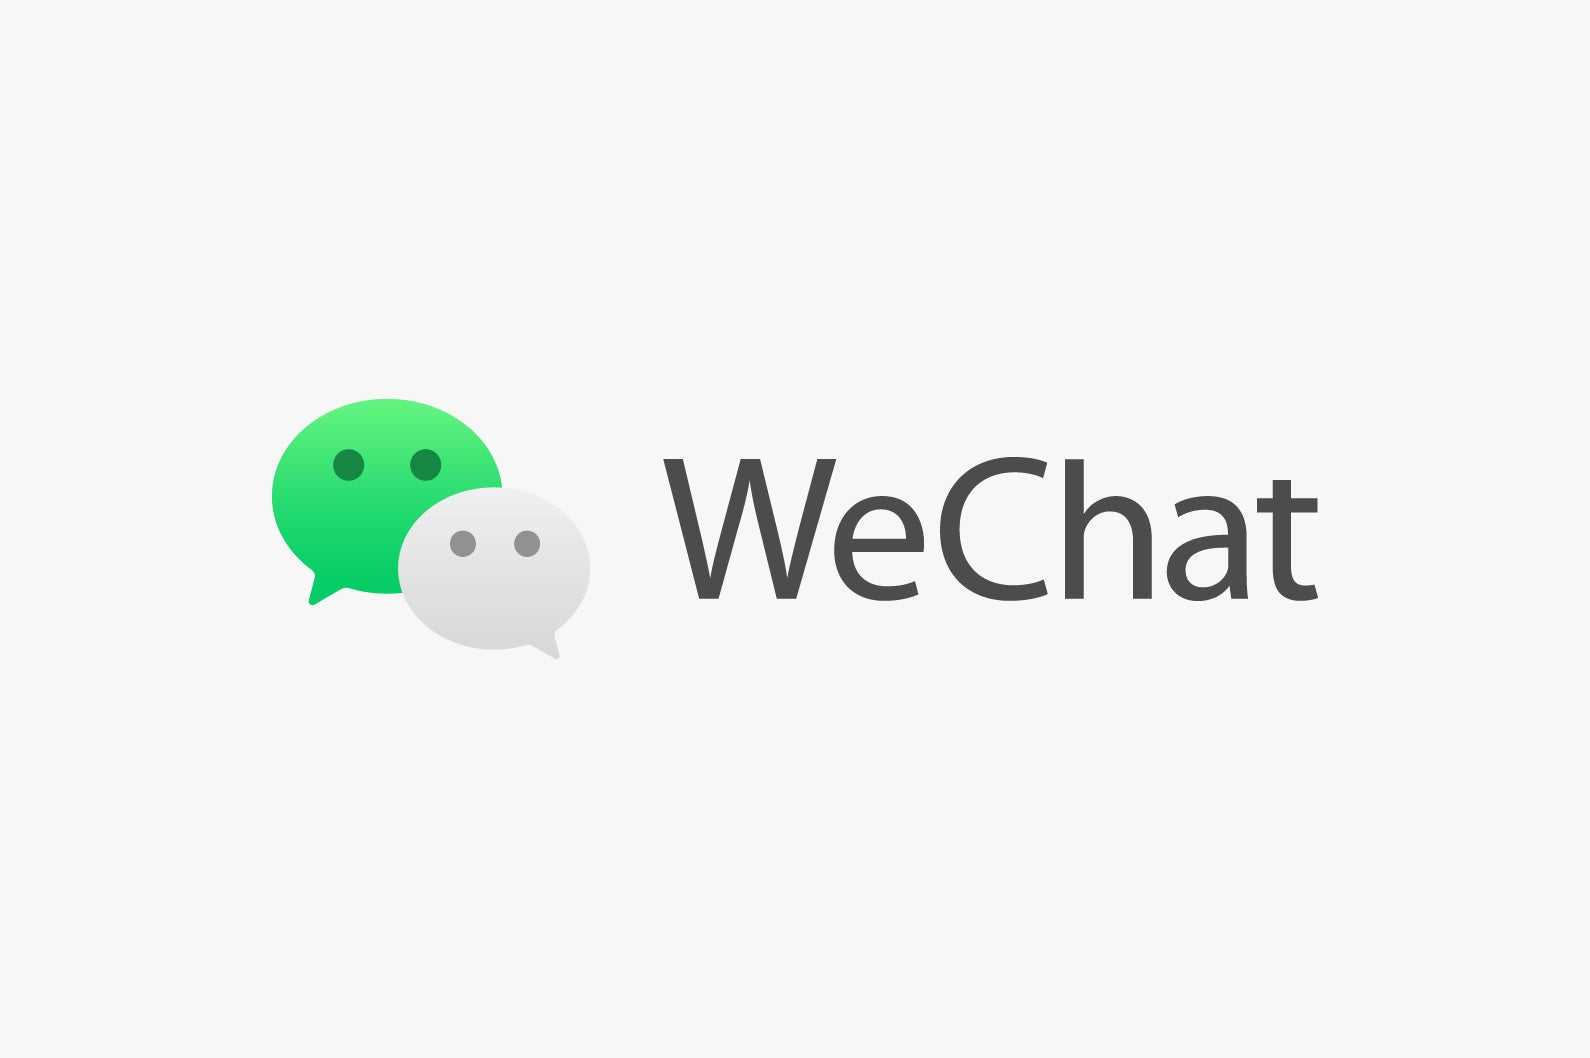 How to Recover WeChat Chat History on iPhone